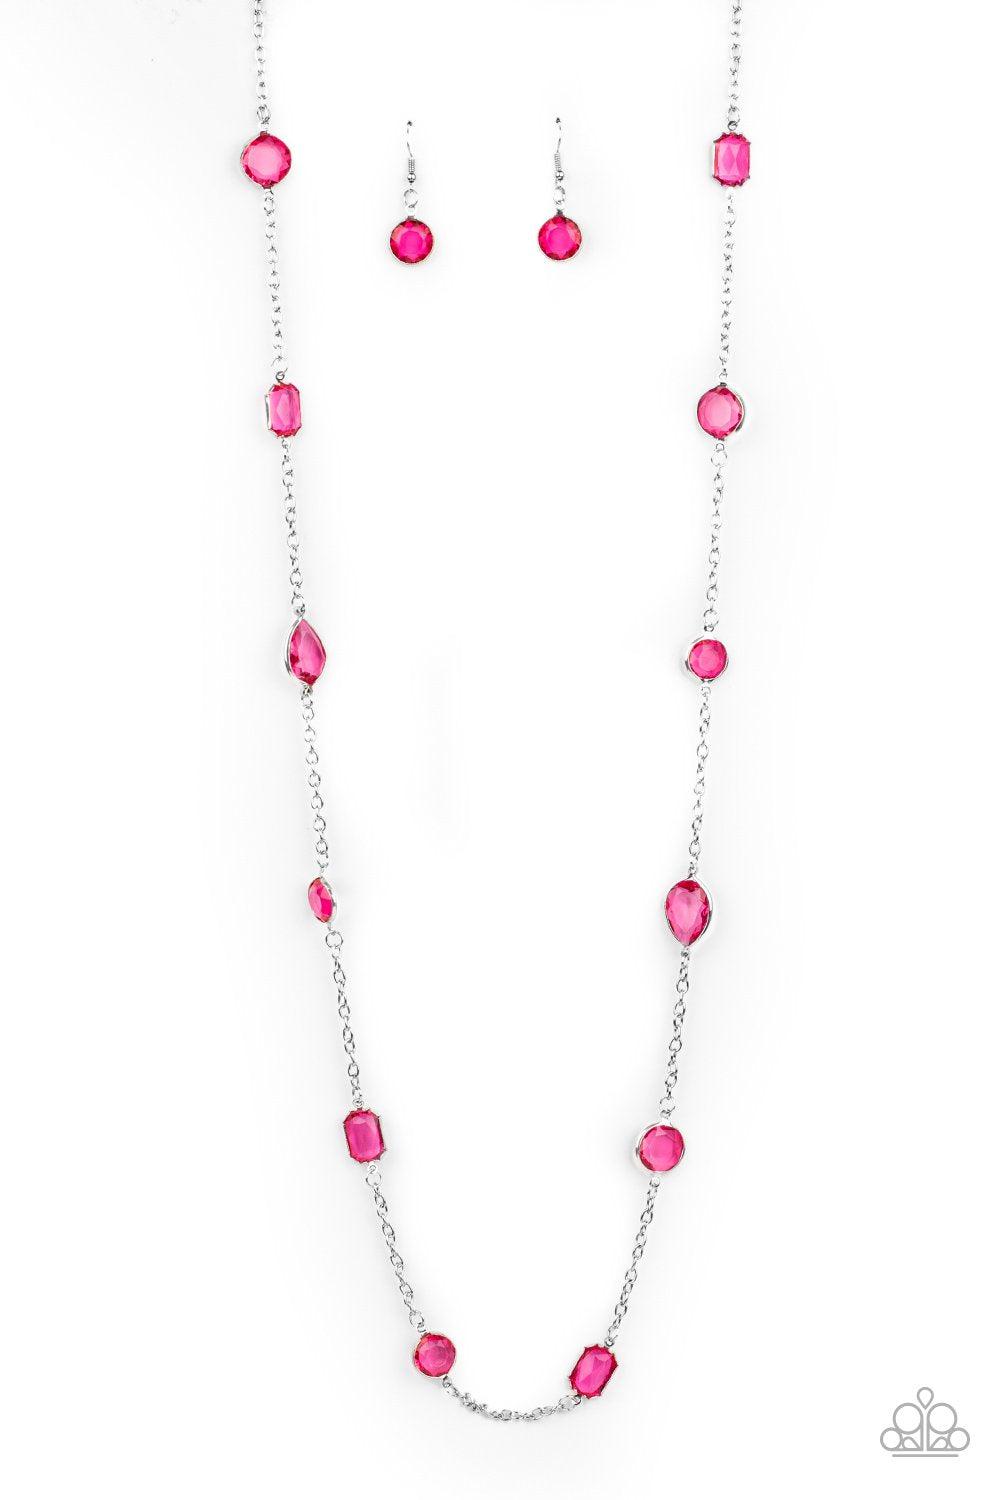 Glassy Glamorous Pink and Silver Necklace - Paparazzi Accessories - lightbox -CarasShop.com - $5 Jewelry by Cara Jewels